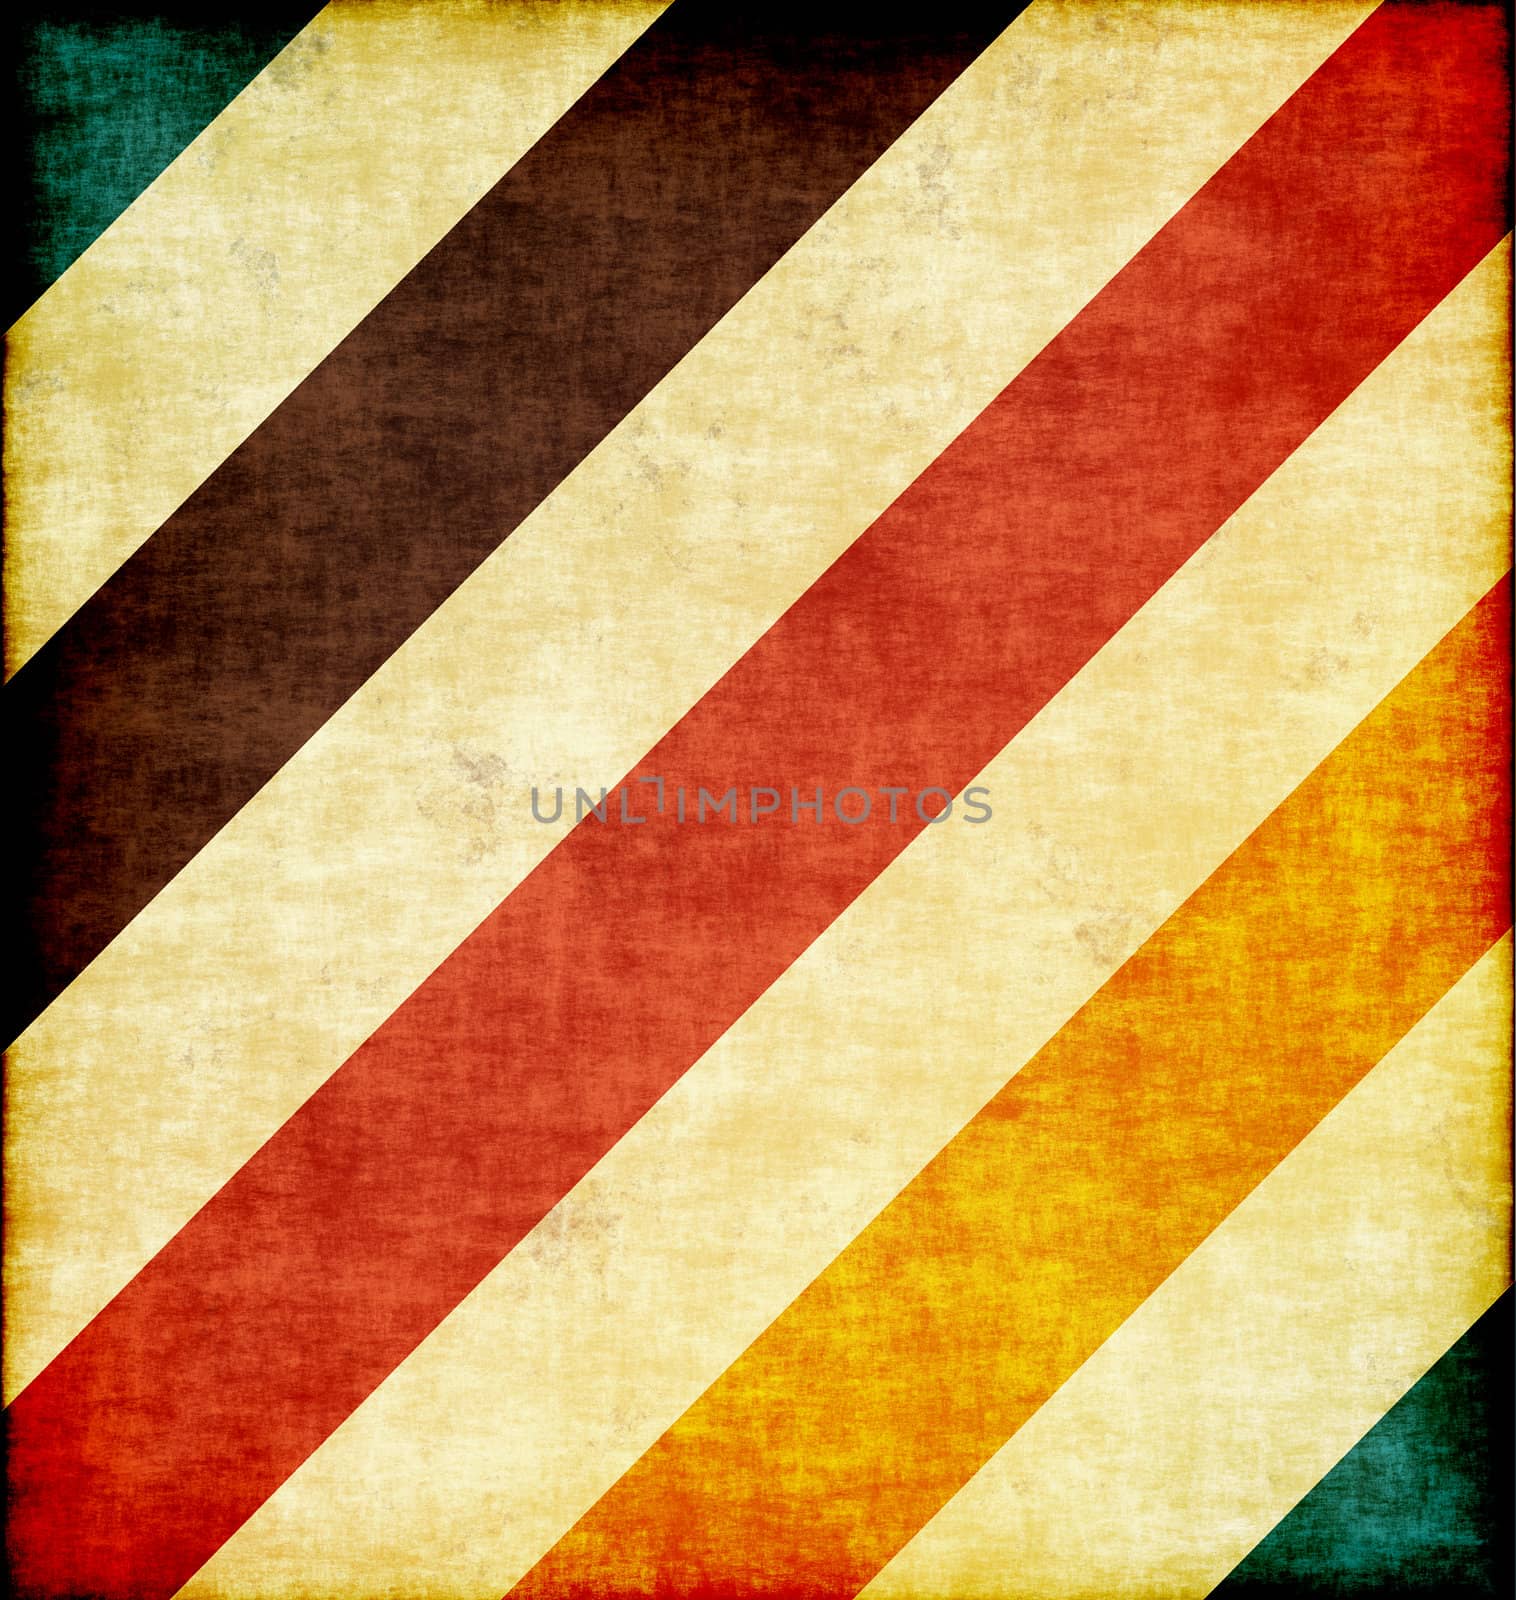 grungy stripes of alternating five colors